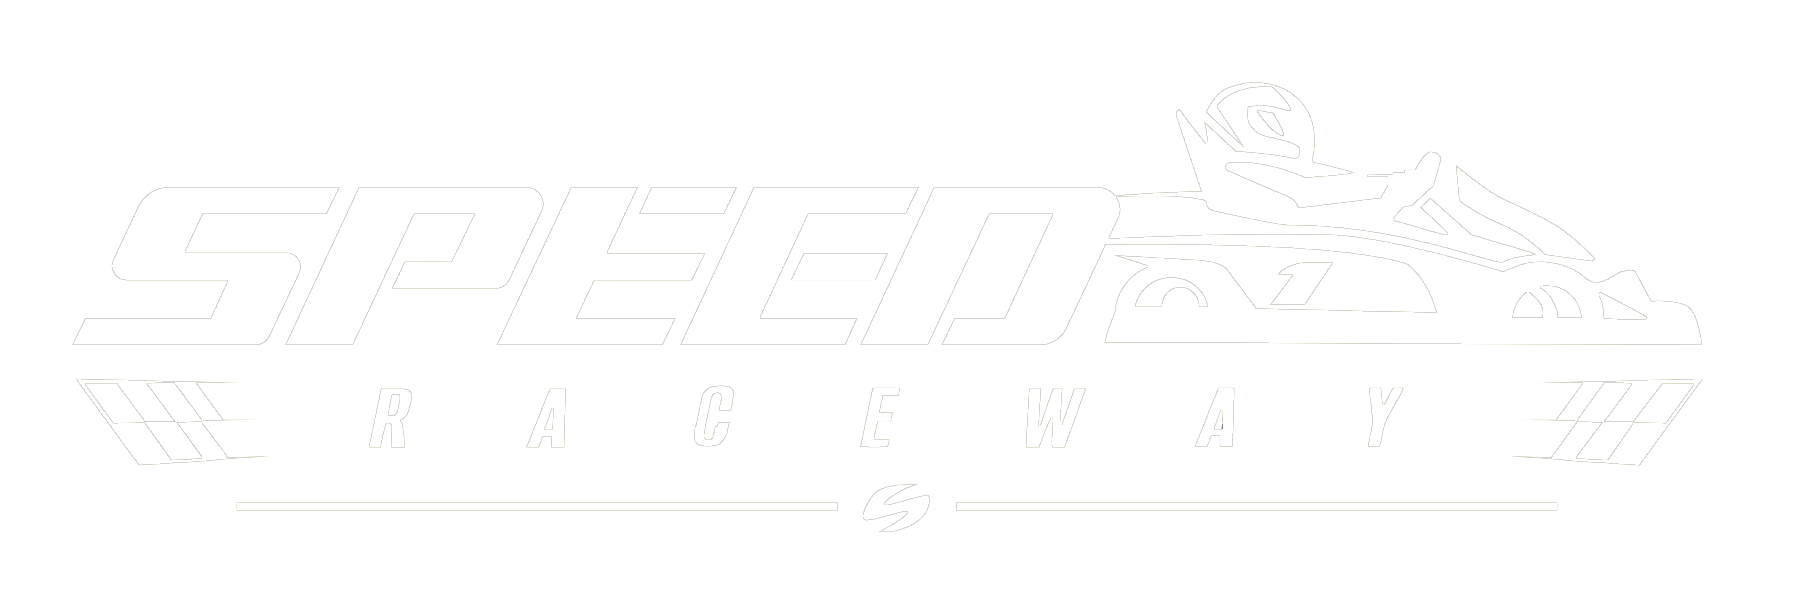 speed raceway - white.png